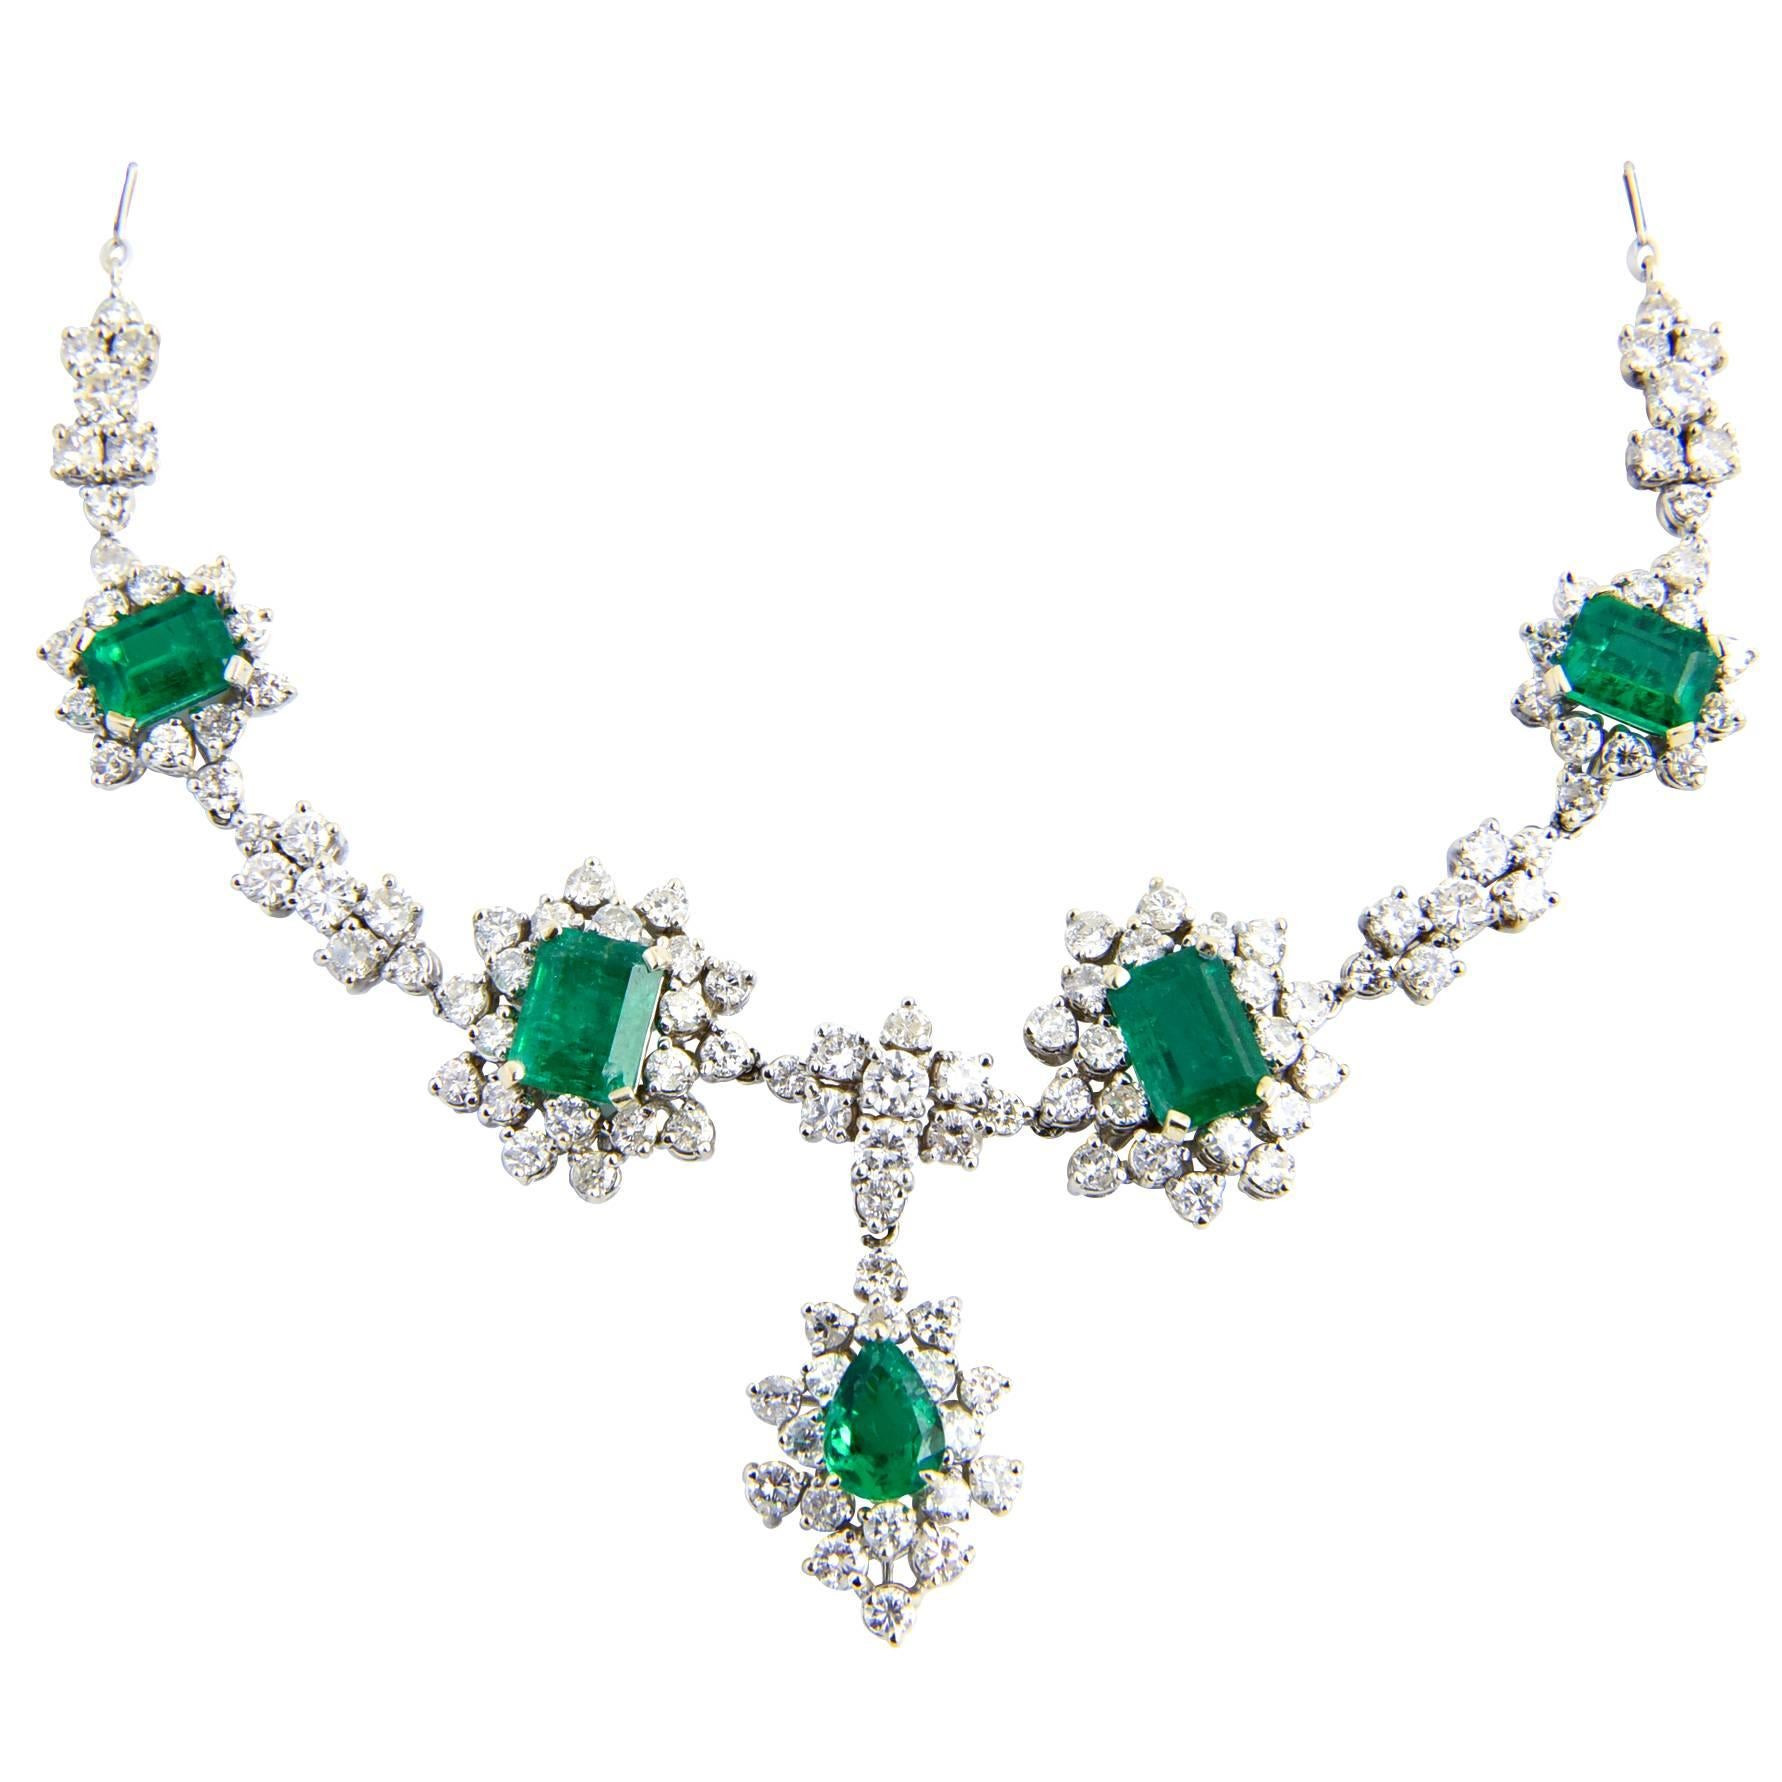 1950s Zambian Emerald, Diamond and Gold Necklace, Red Carpet Style GIA Cert